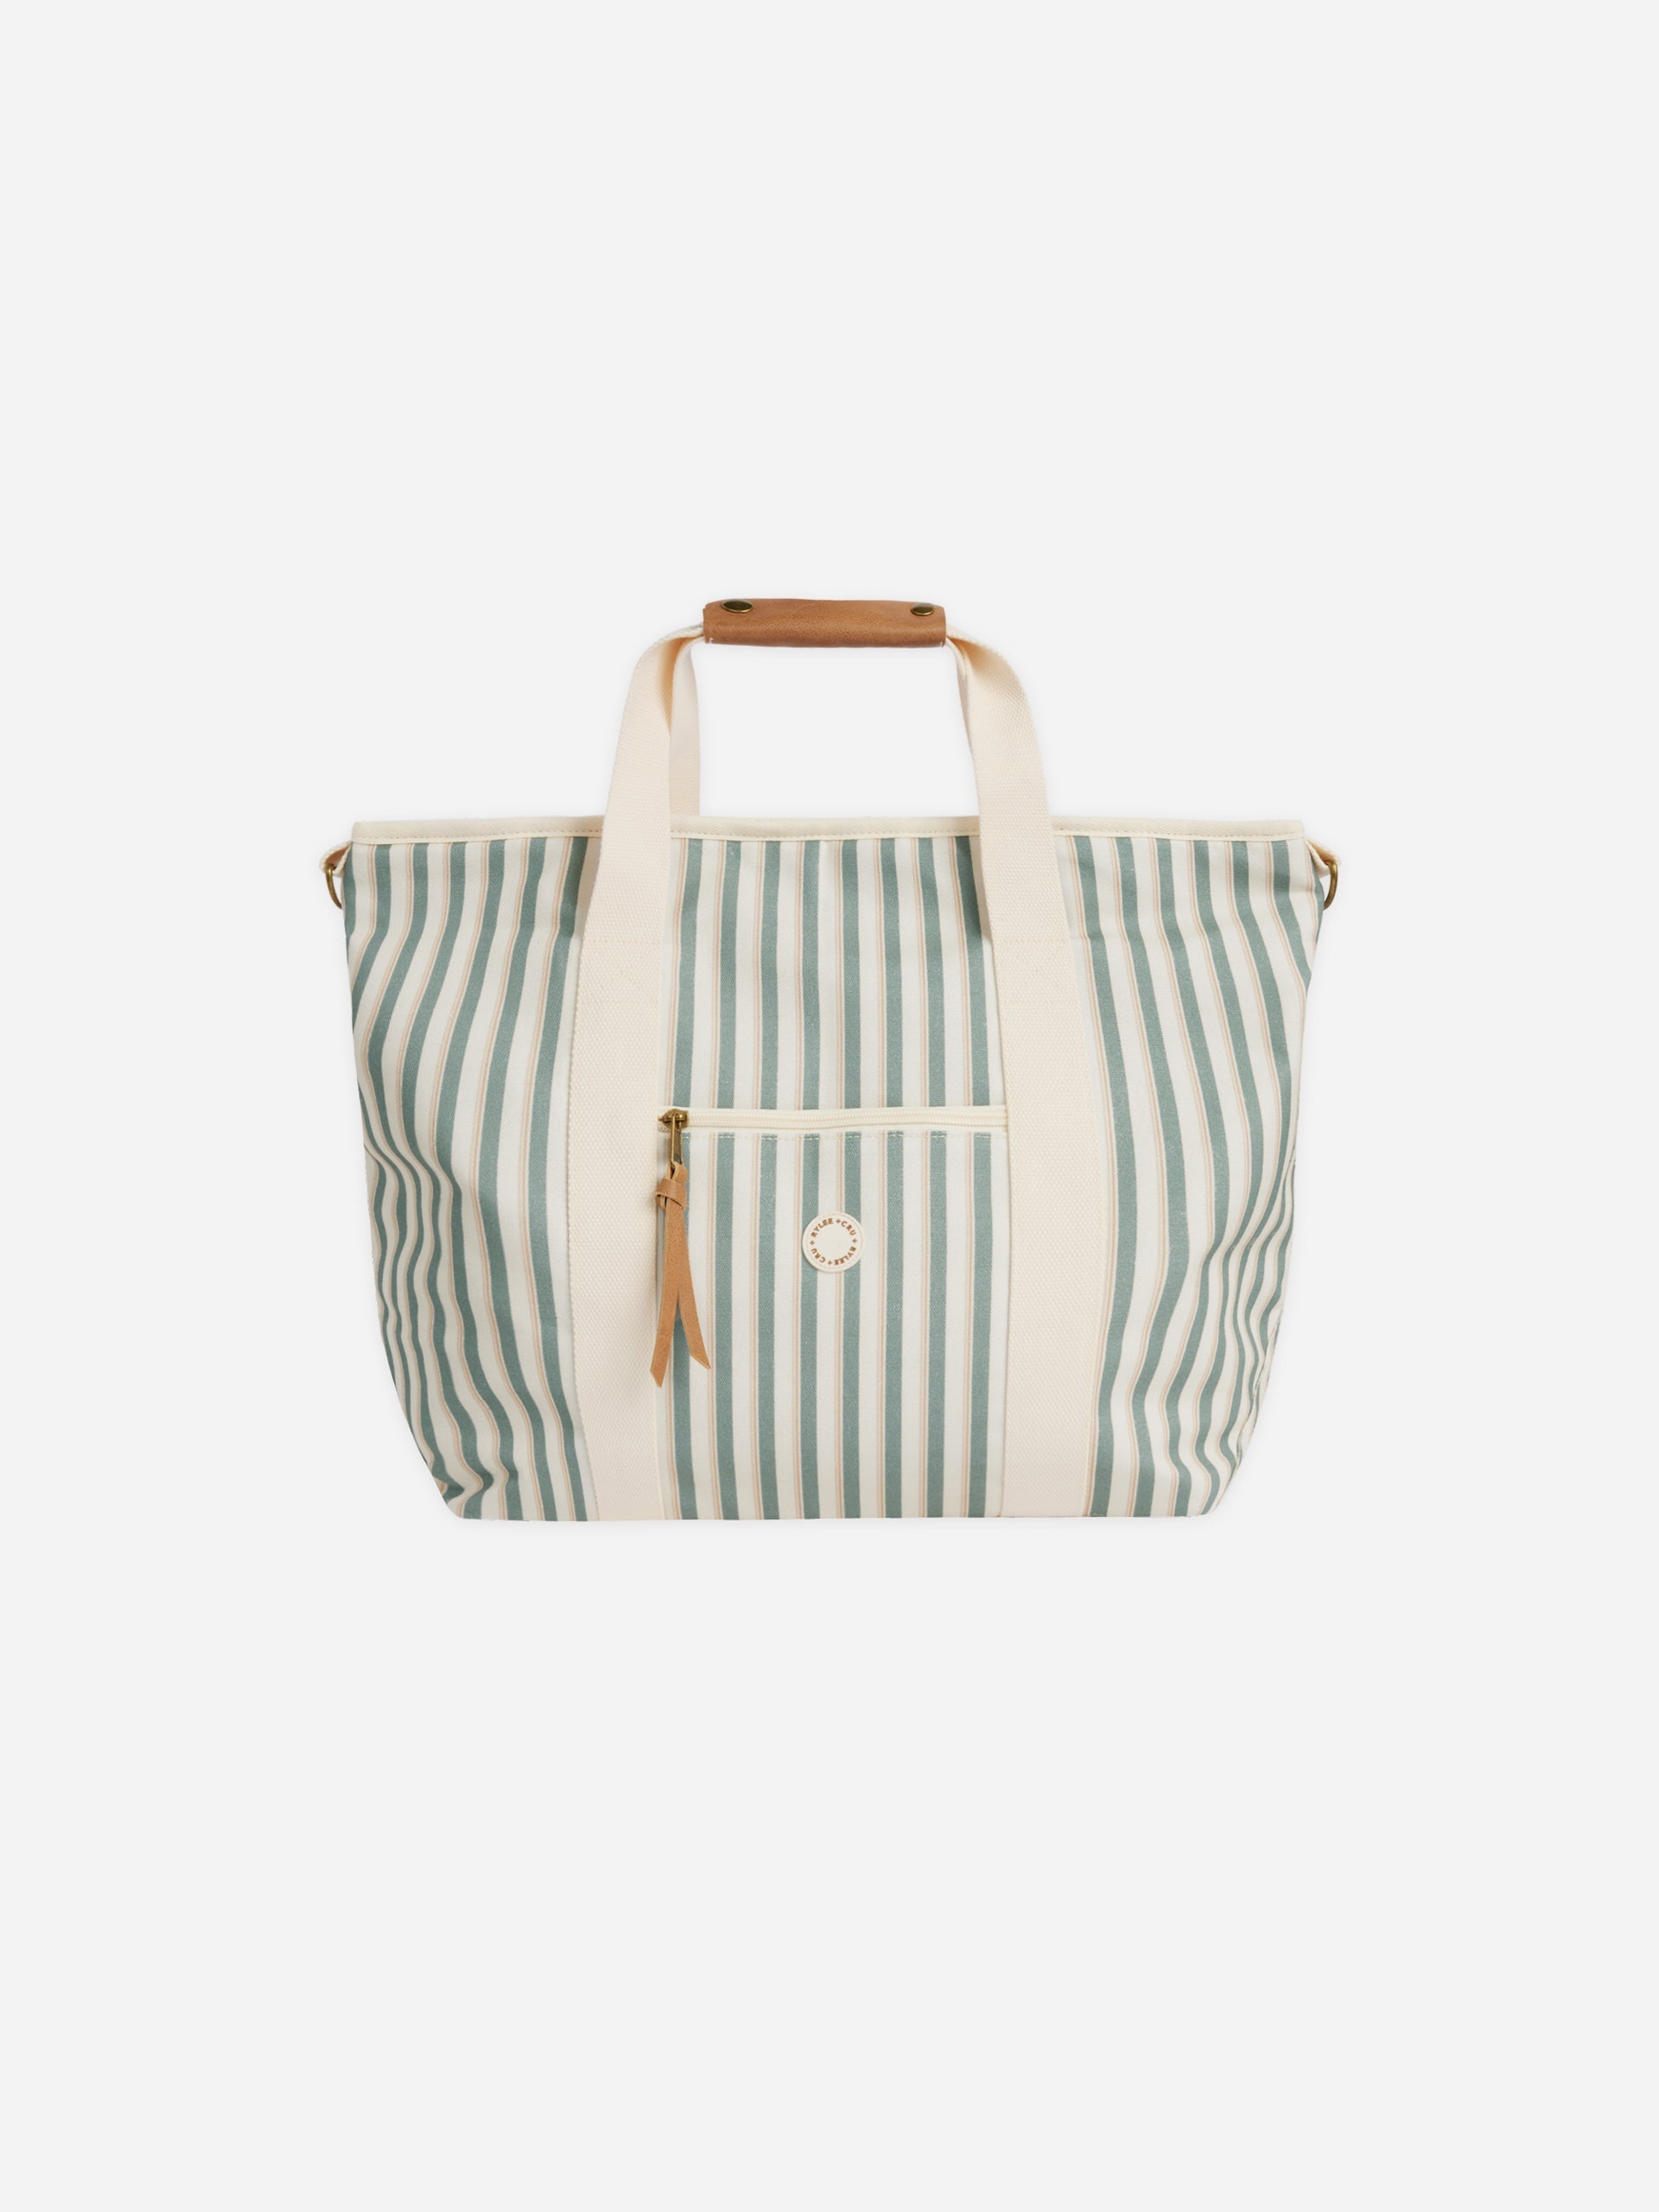 Cooler Tote || Aqua Stripe - Rylee + Cru | Kids Clothes | Trendy Baby Clothes | Modern Infant Outfits |